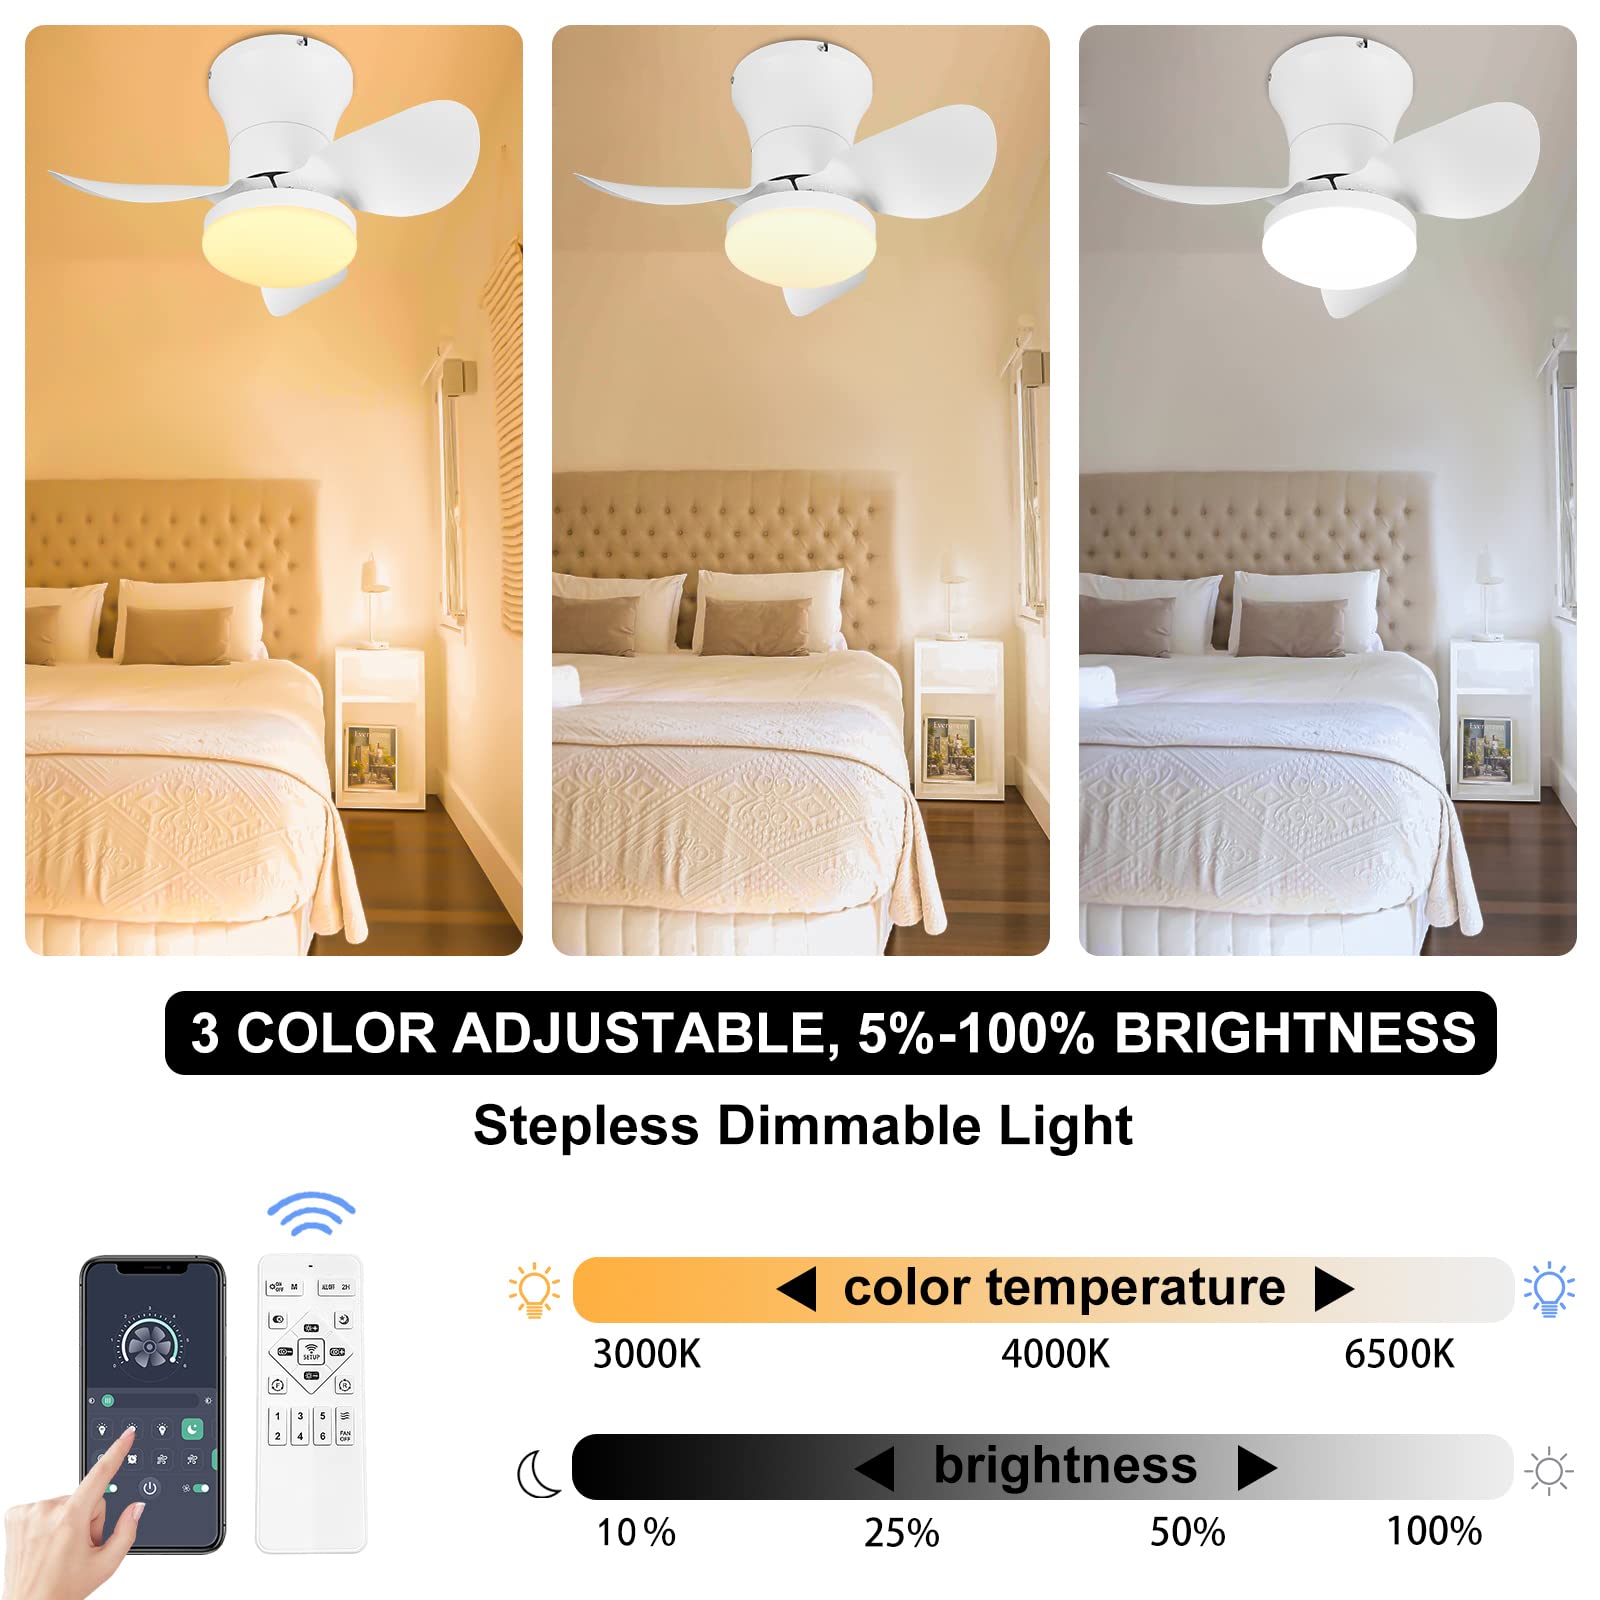 Ceiling Fan with Lights and Remote - 21'' Small Flush Mount Ceiling Fan APP Control - Dimmable Quiet Ceiling Fan Lights for Kitchen Bedroom(White)